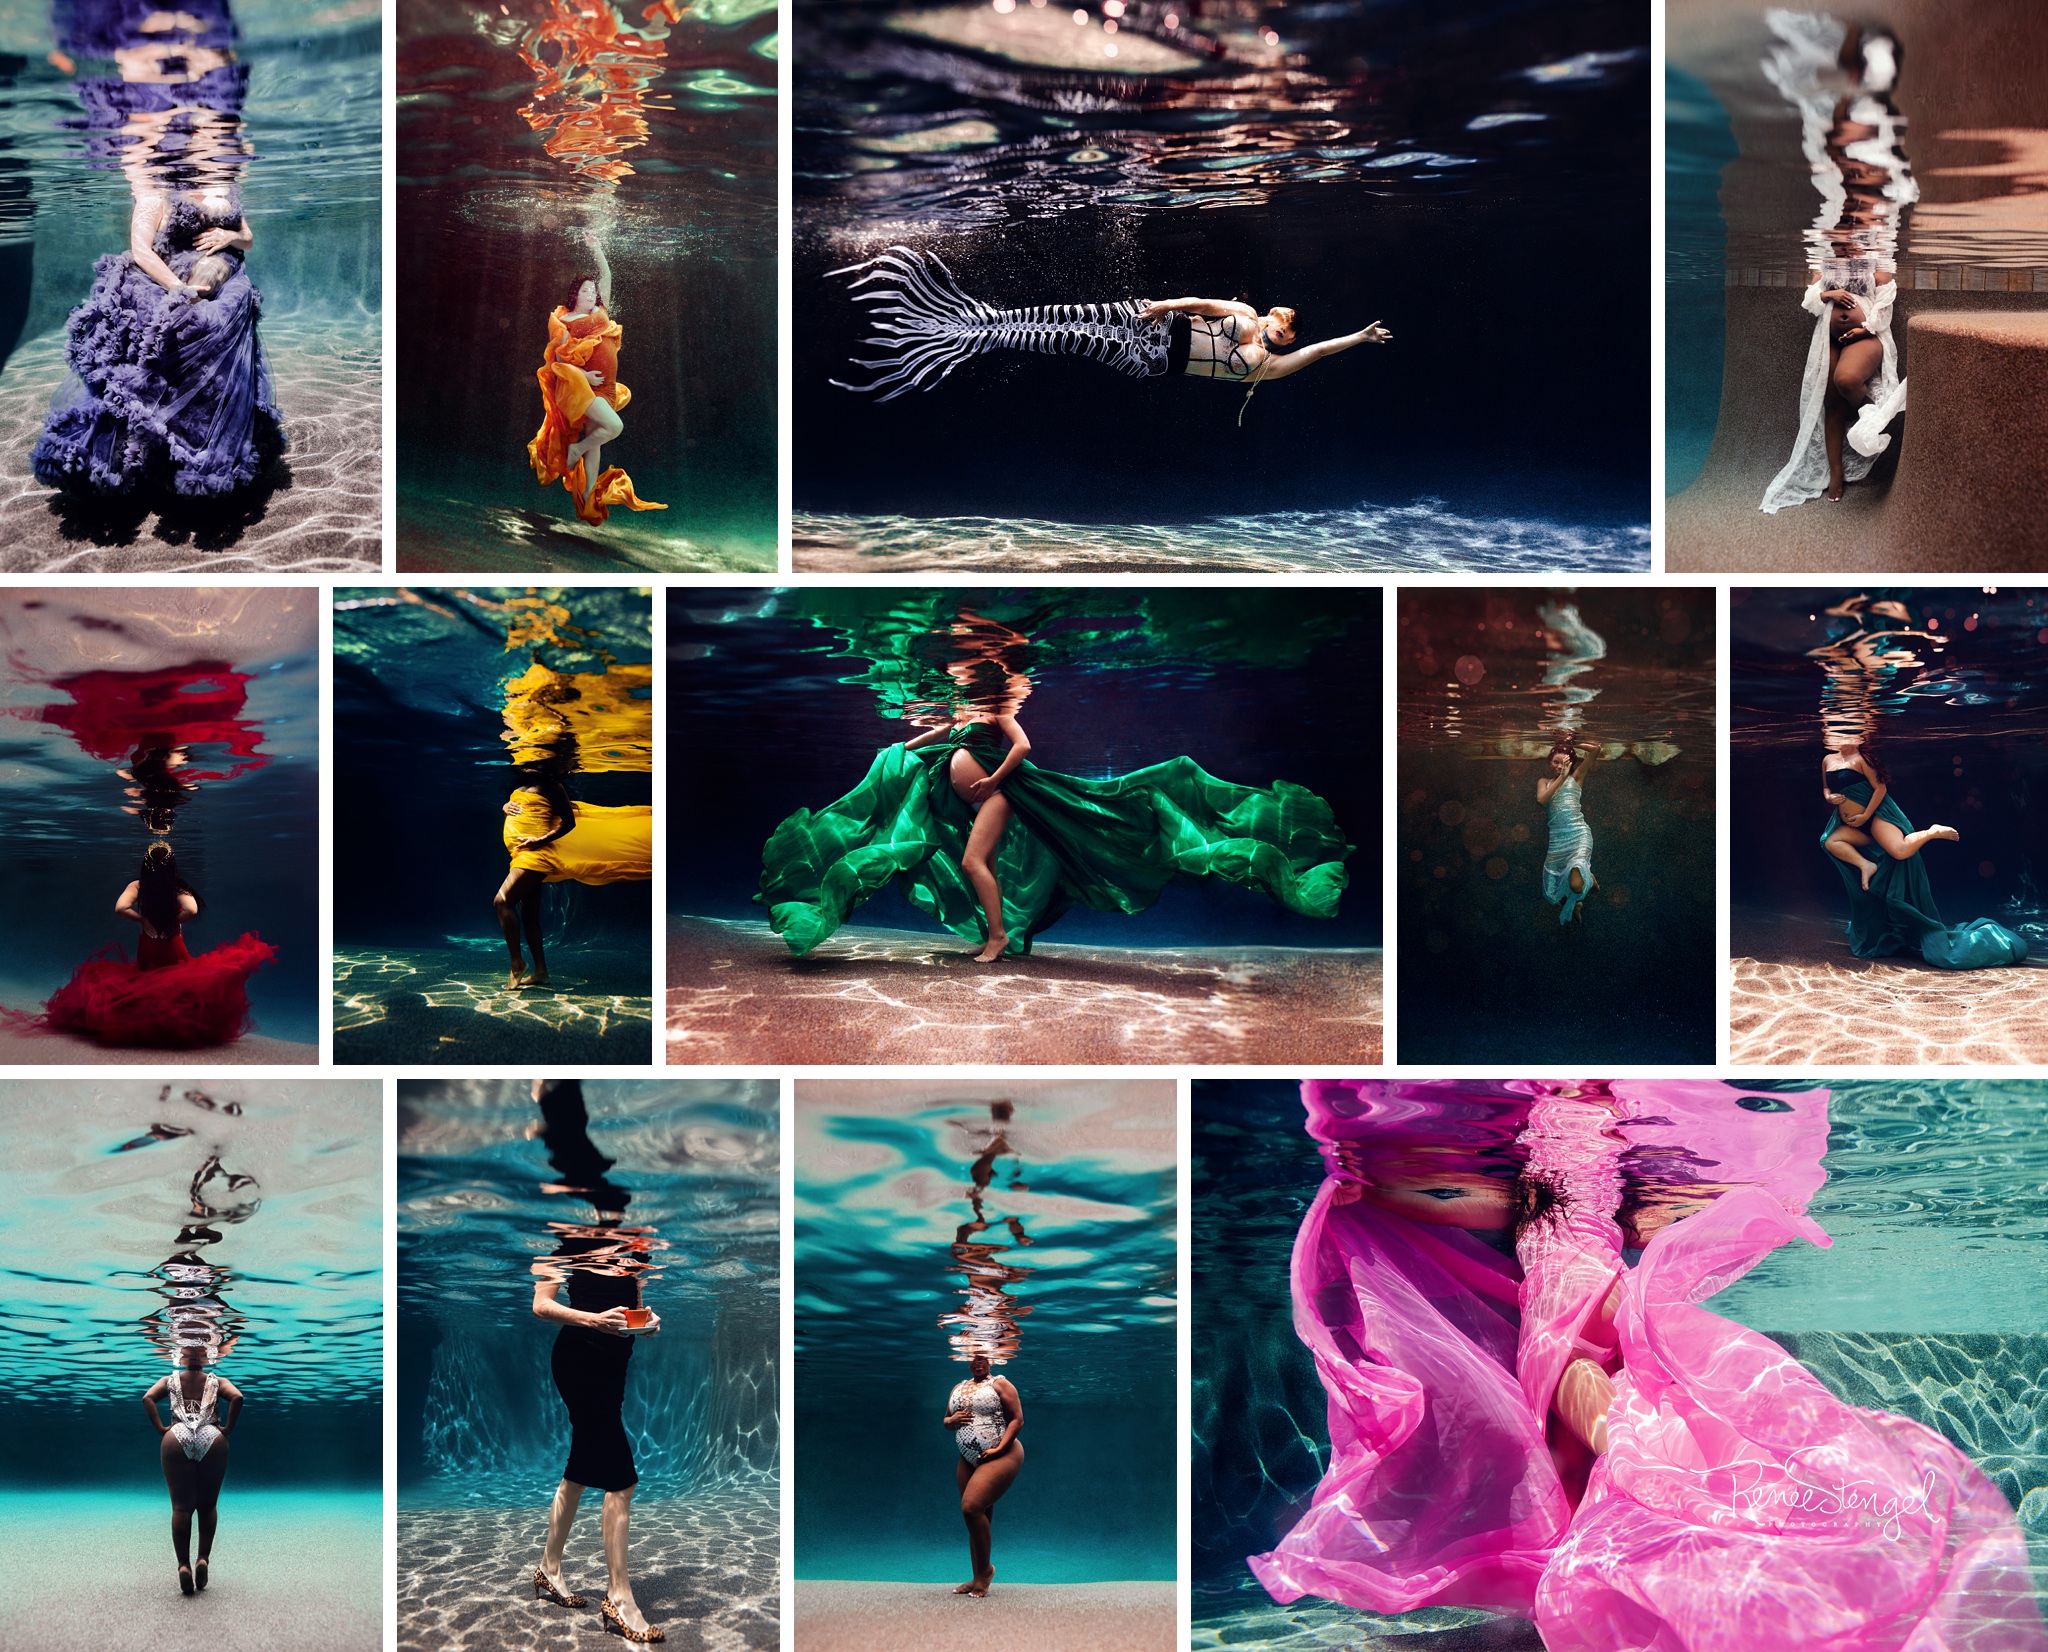 Many Underwater Photography looks from one pool in Charlotte NC